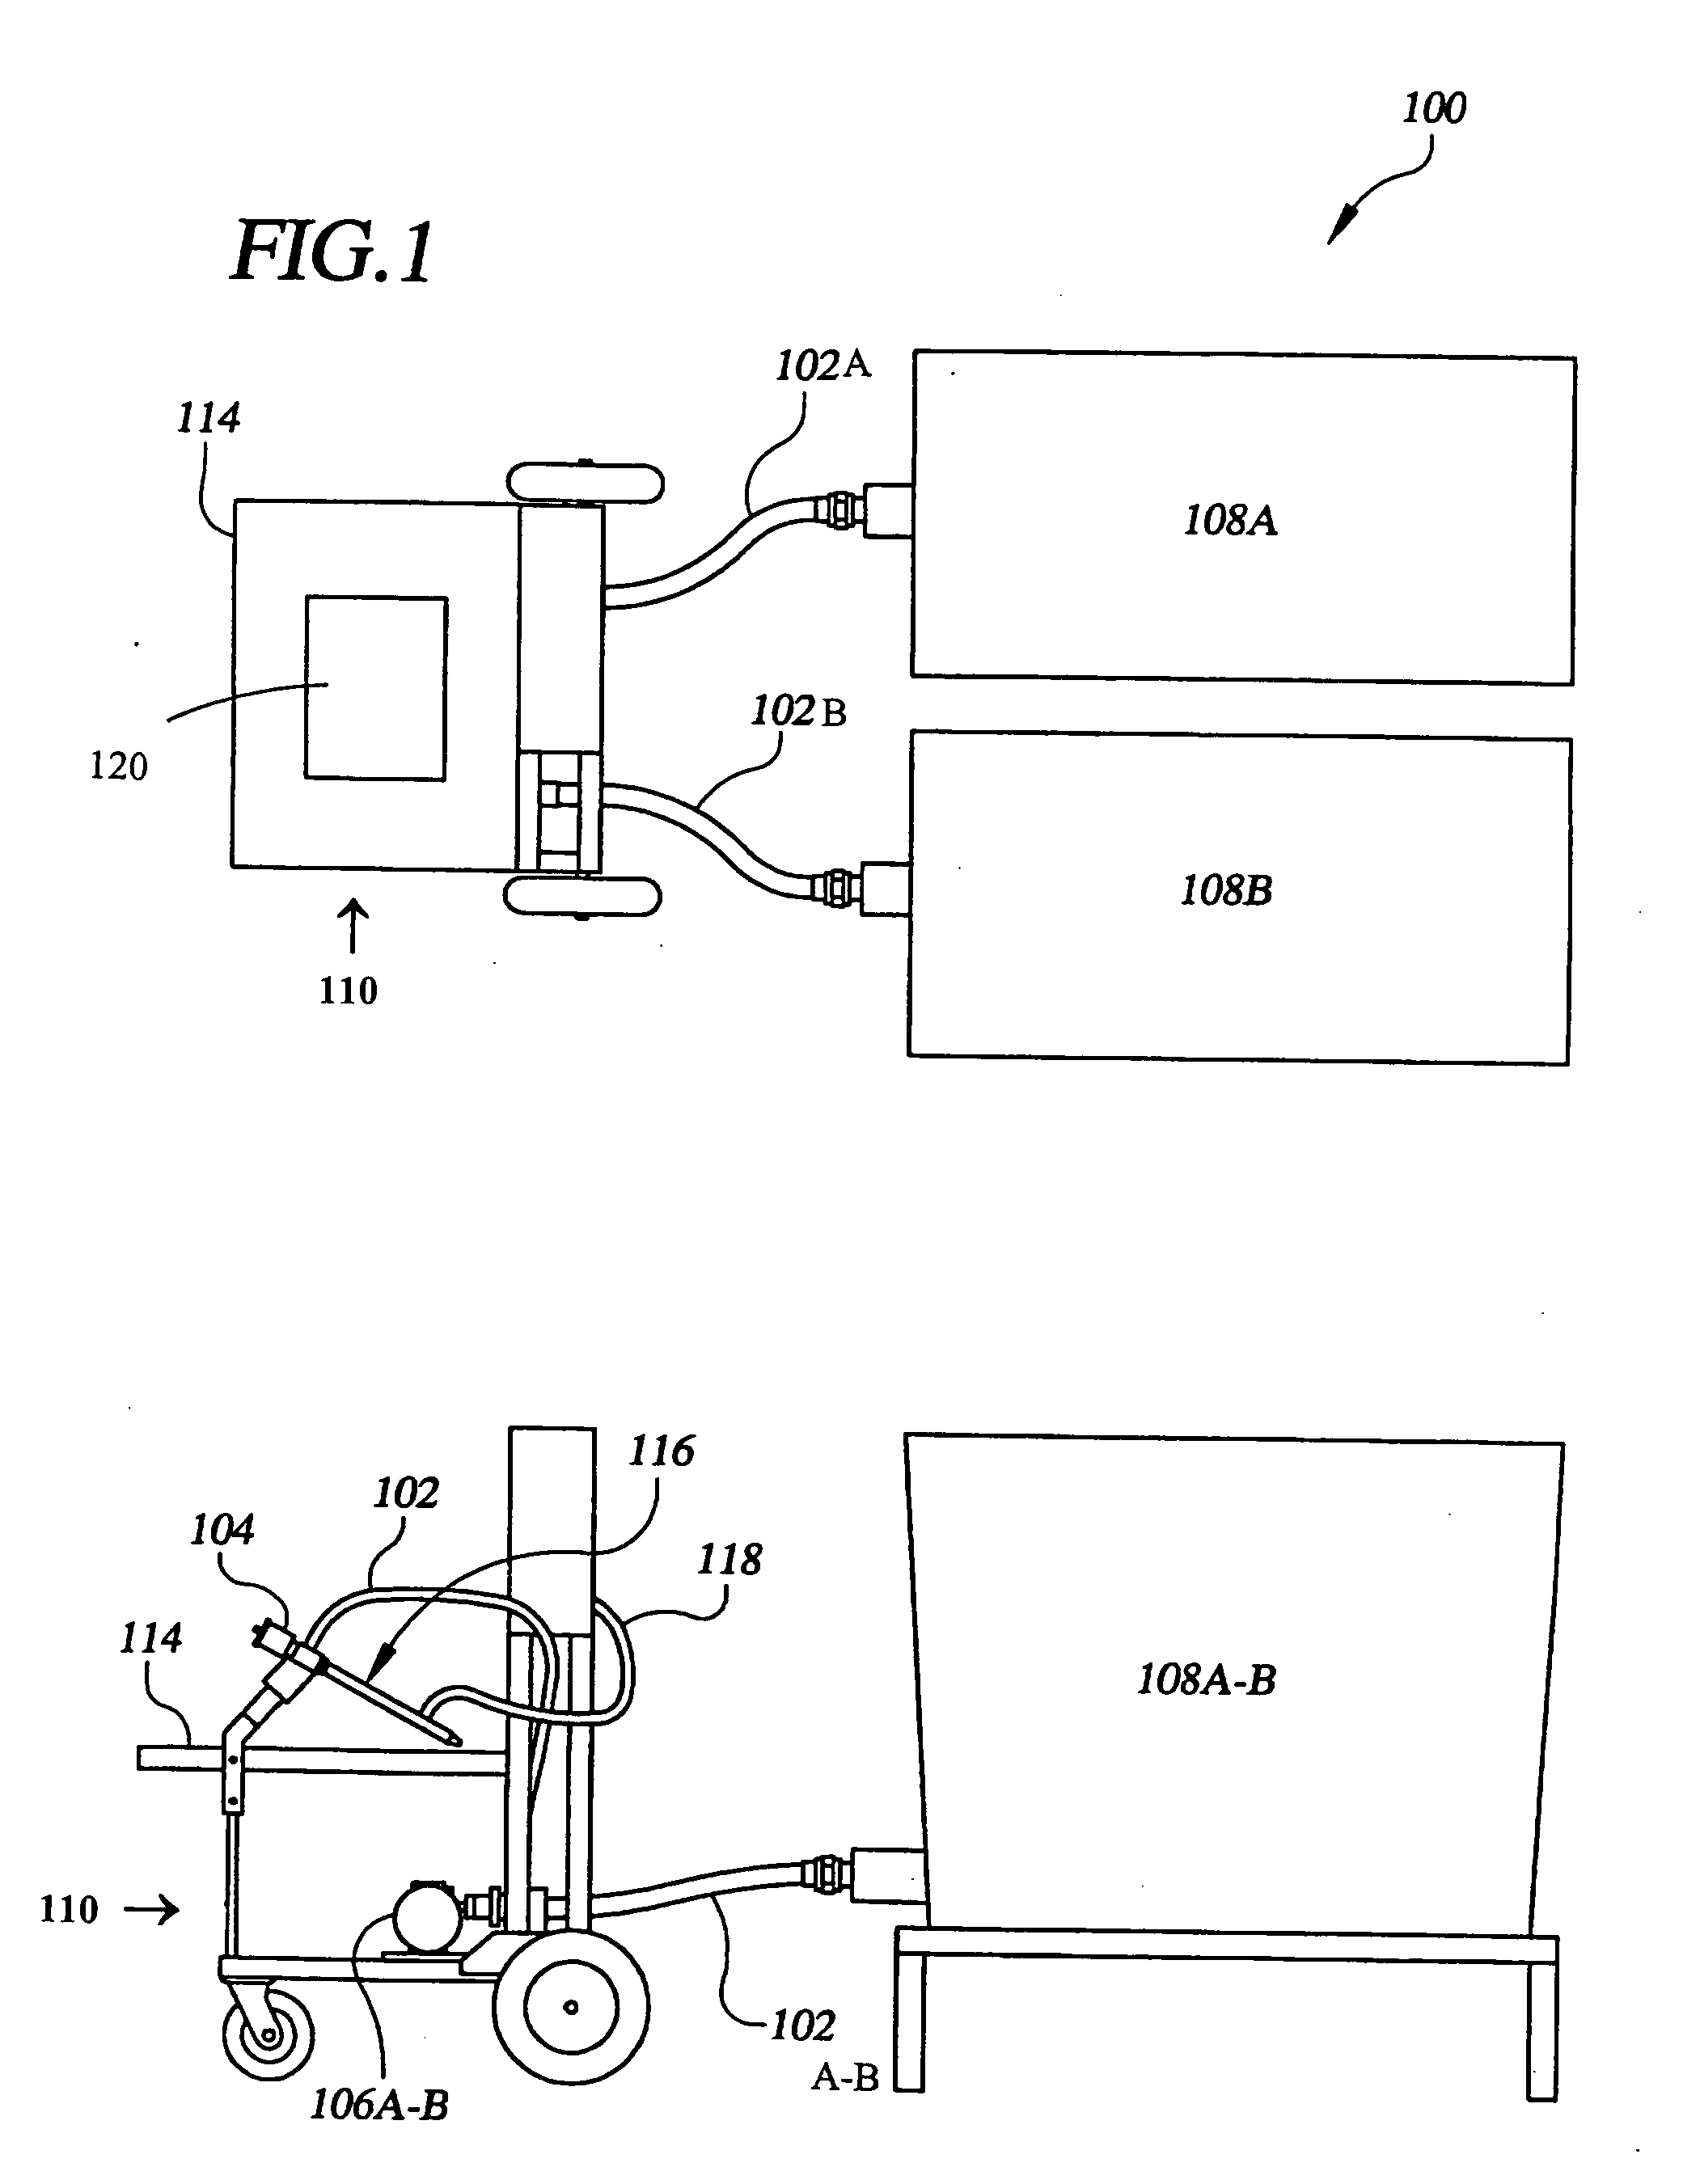 Apparatus for flatproofing a tire and wheel assembly